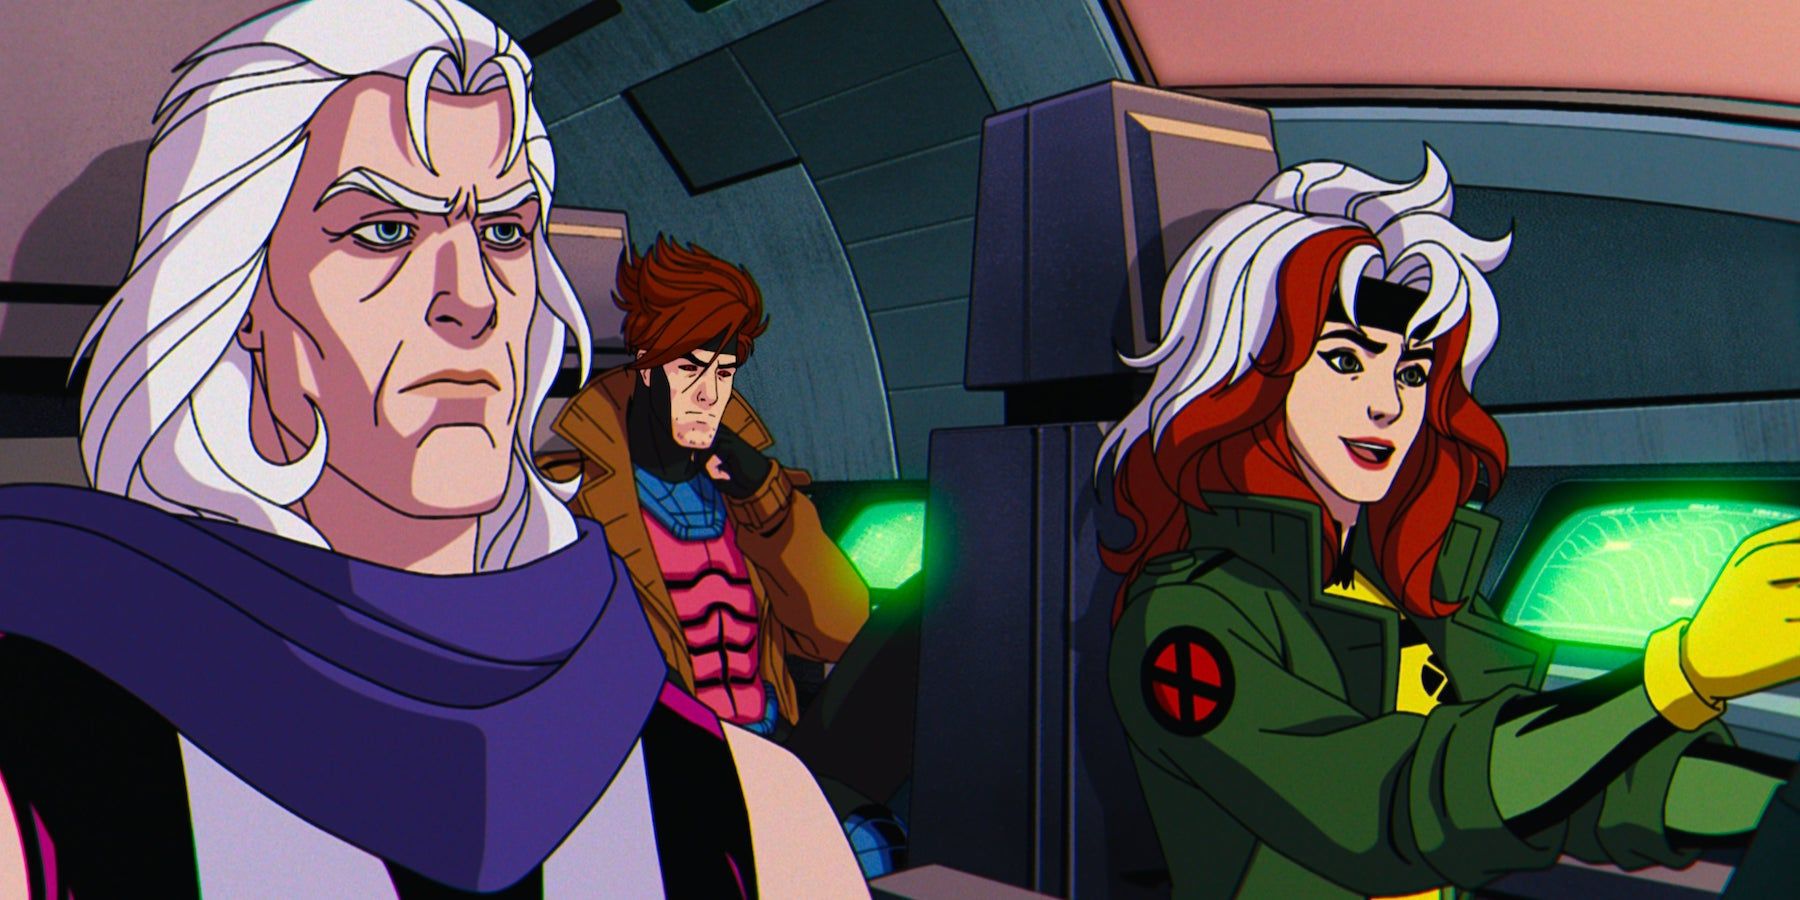 X-Men '97 Episode 5 Nails What The MCU Has Been Missing 01